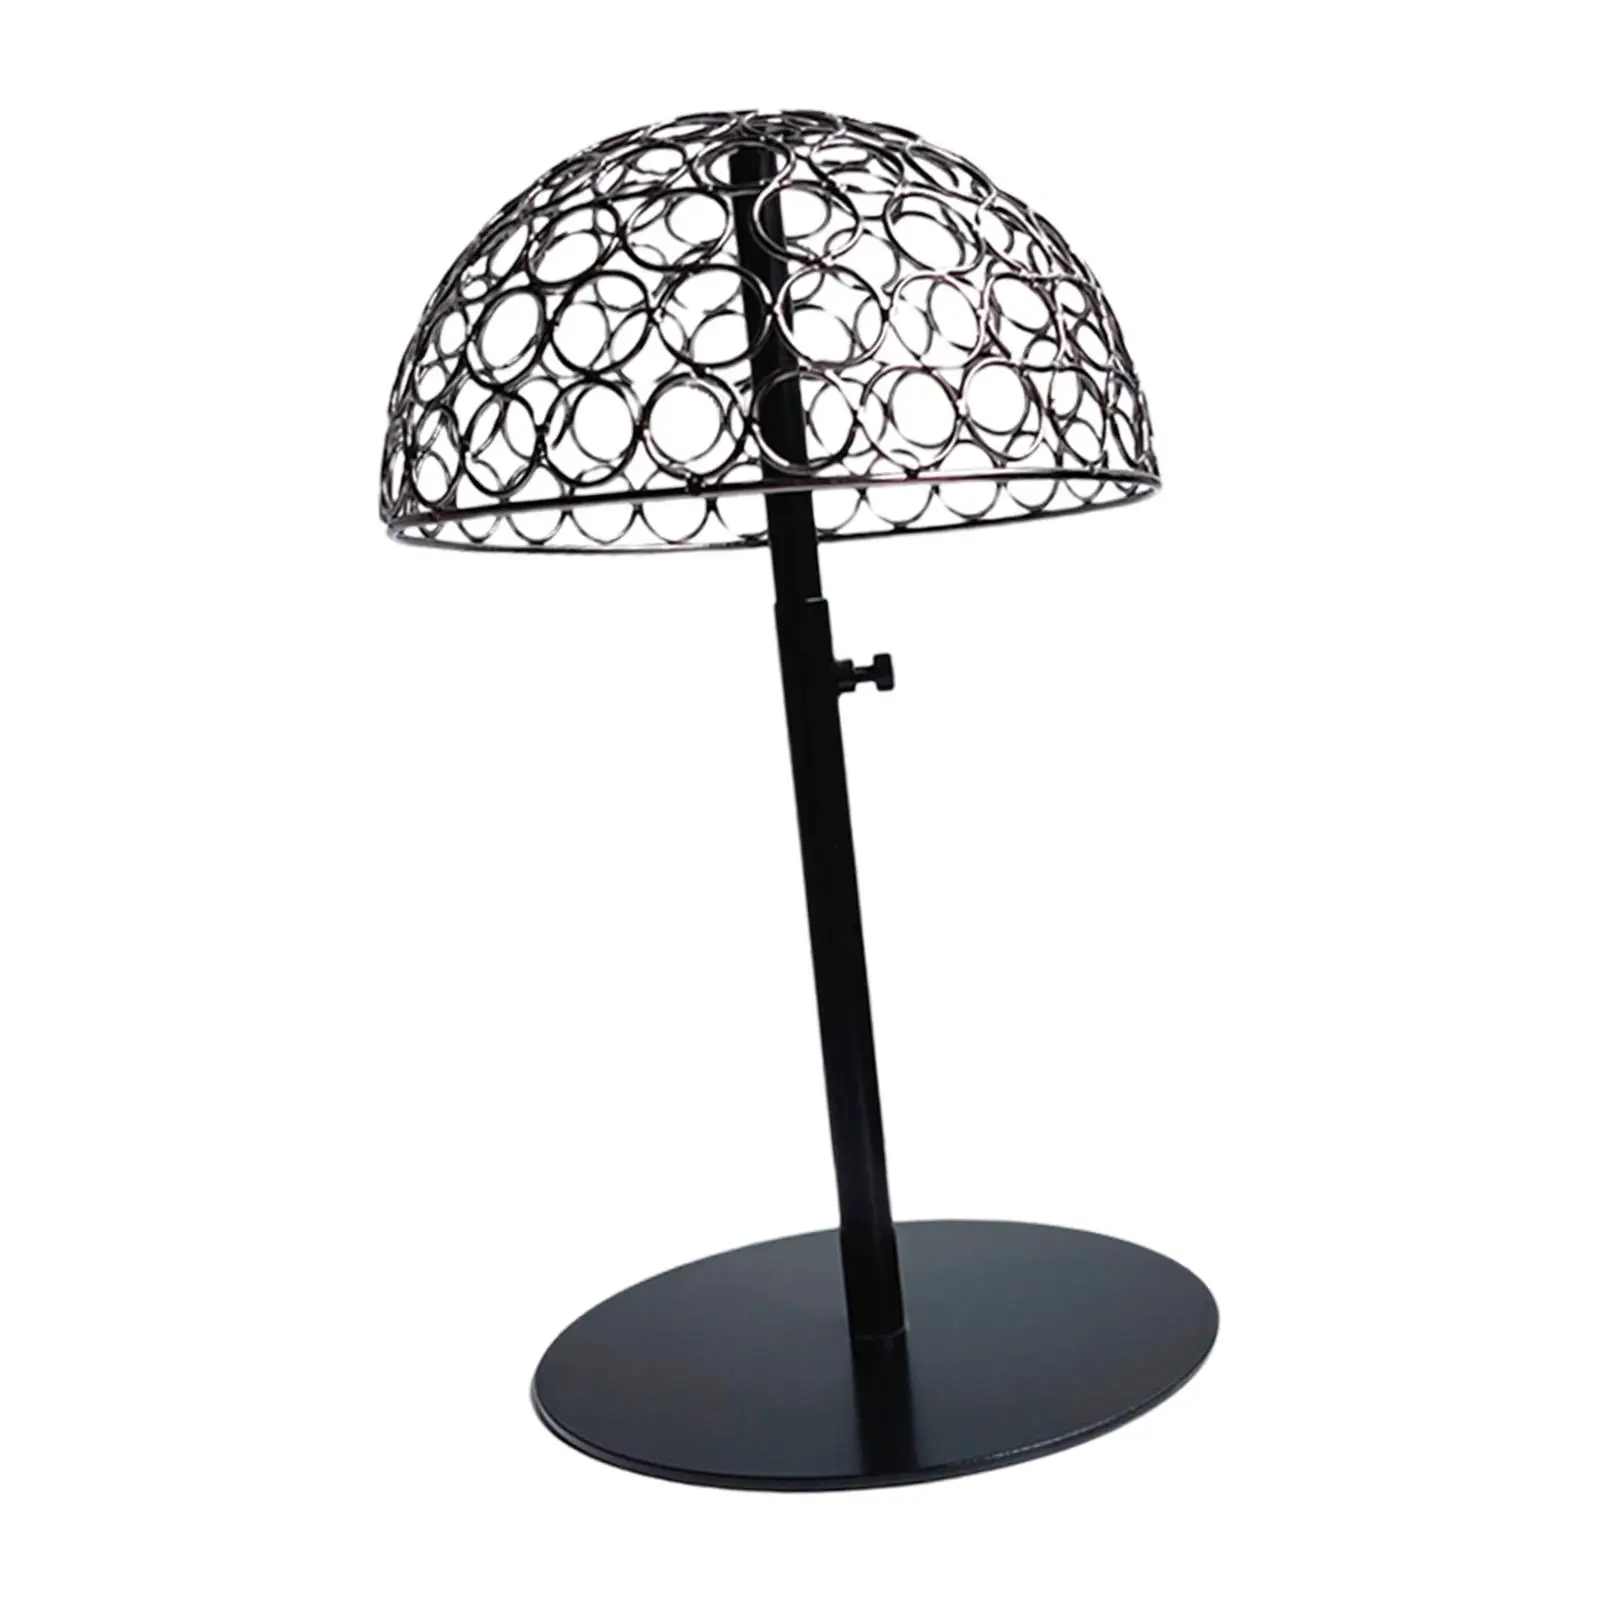 Hat Display Stand Durable Stable Freestanding Caps Storage Rack Hat Rack Hat Holder for Decoration Home Use Styling Drying Salon